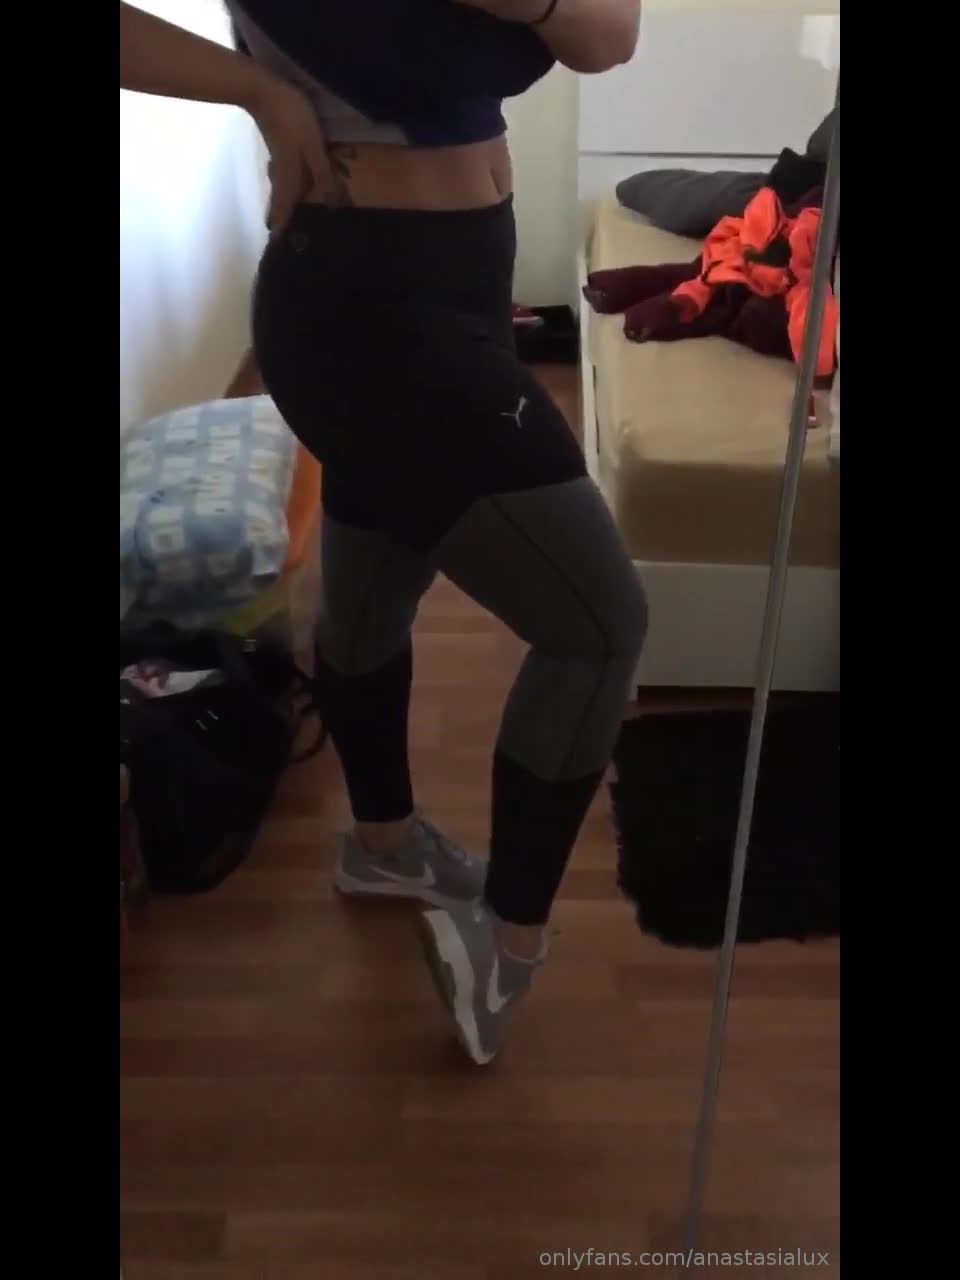 Anastasia Lux () Anastasialux - mirror flaunting before a gym session part of the routine i guess who wants be my 13-01-2019